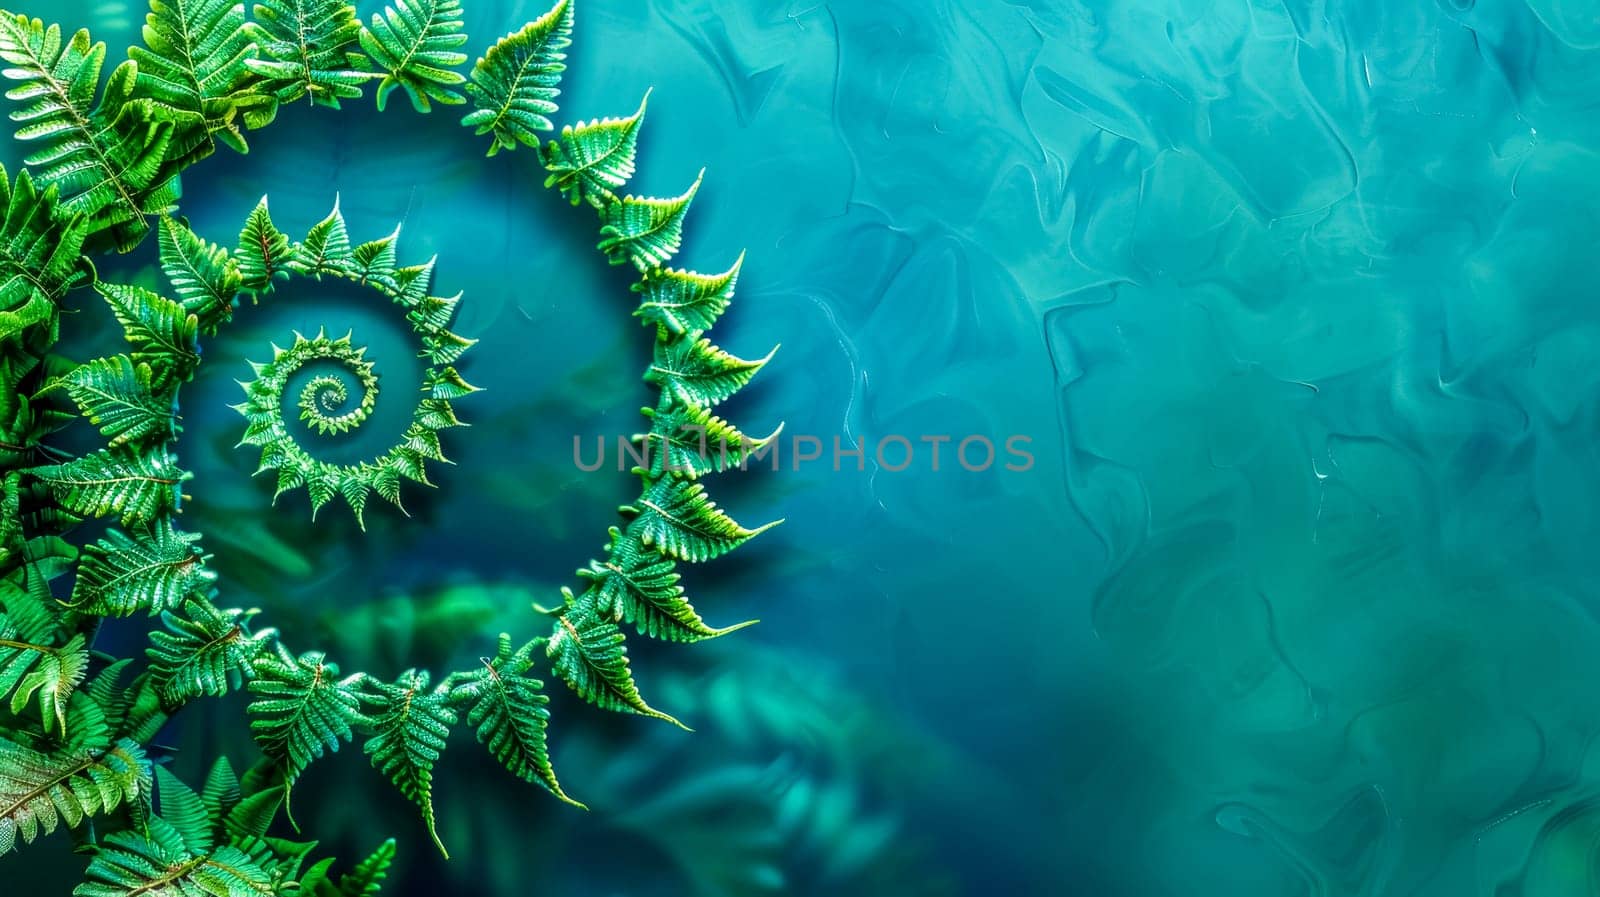 A vivid green fern spiral showcasing natural geometry, contrasted with a tranquil blue water backdrop